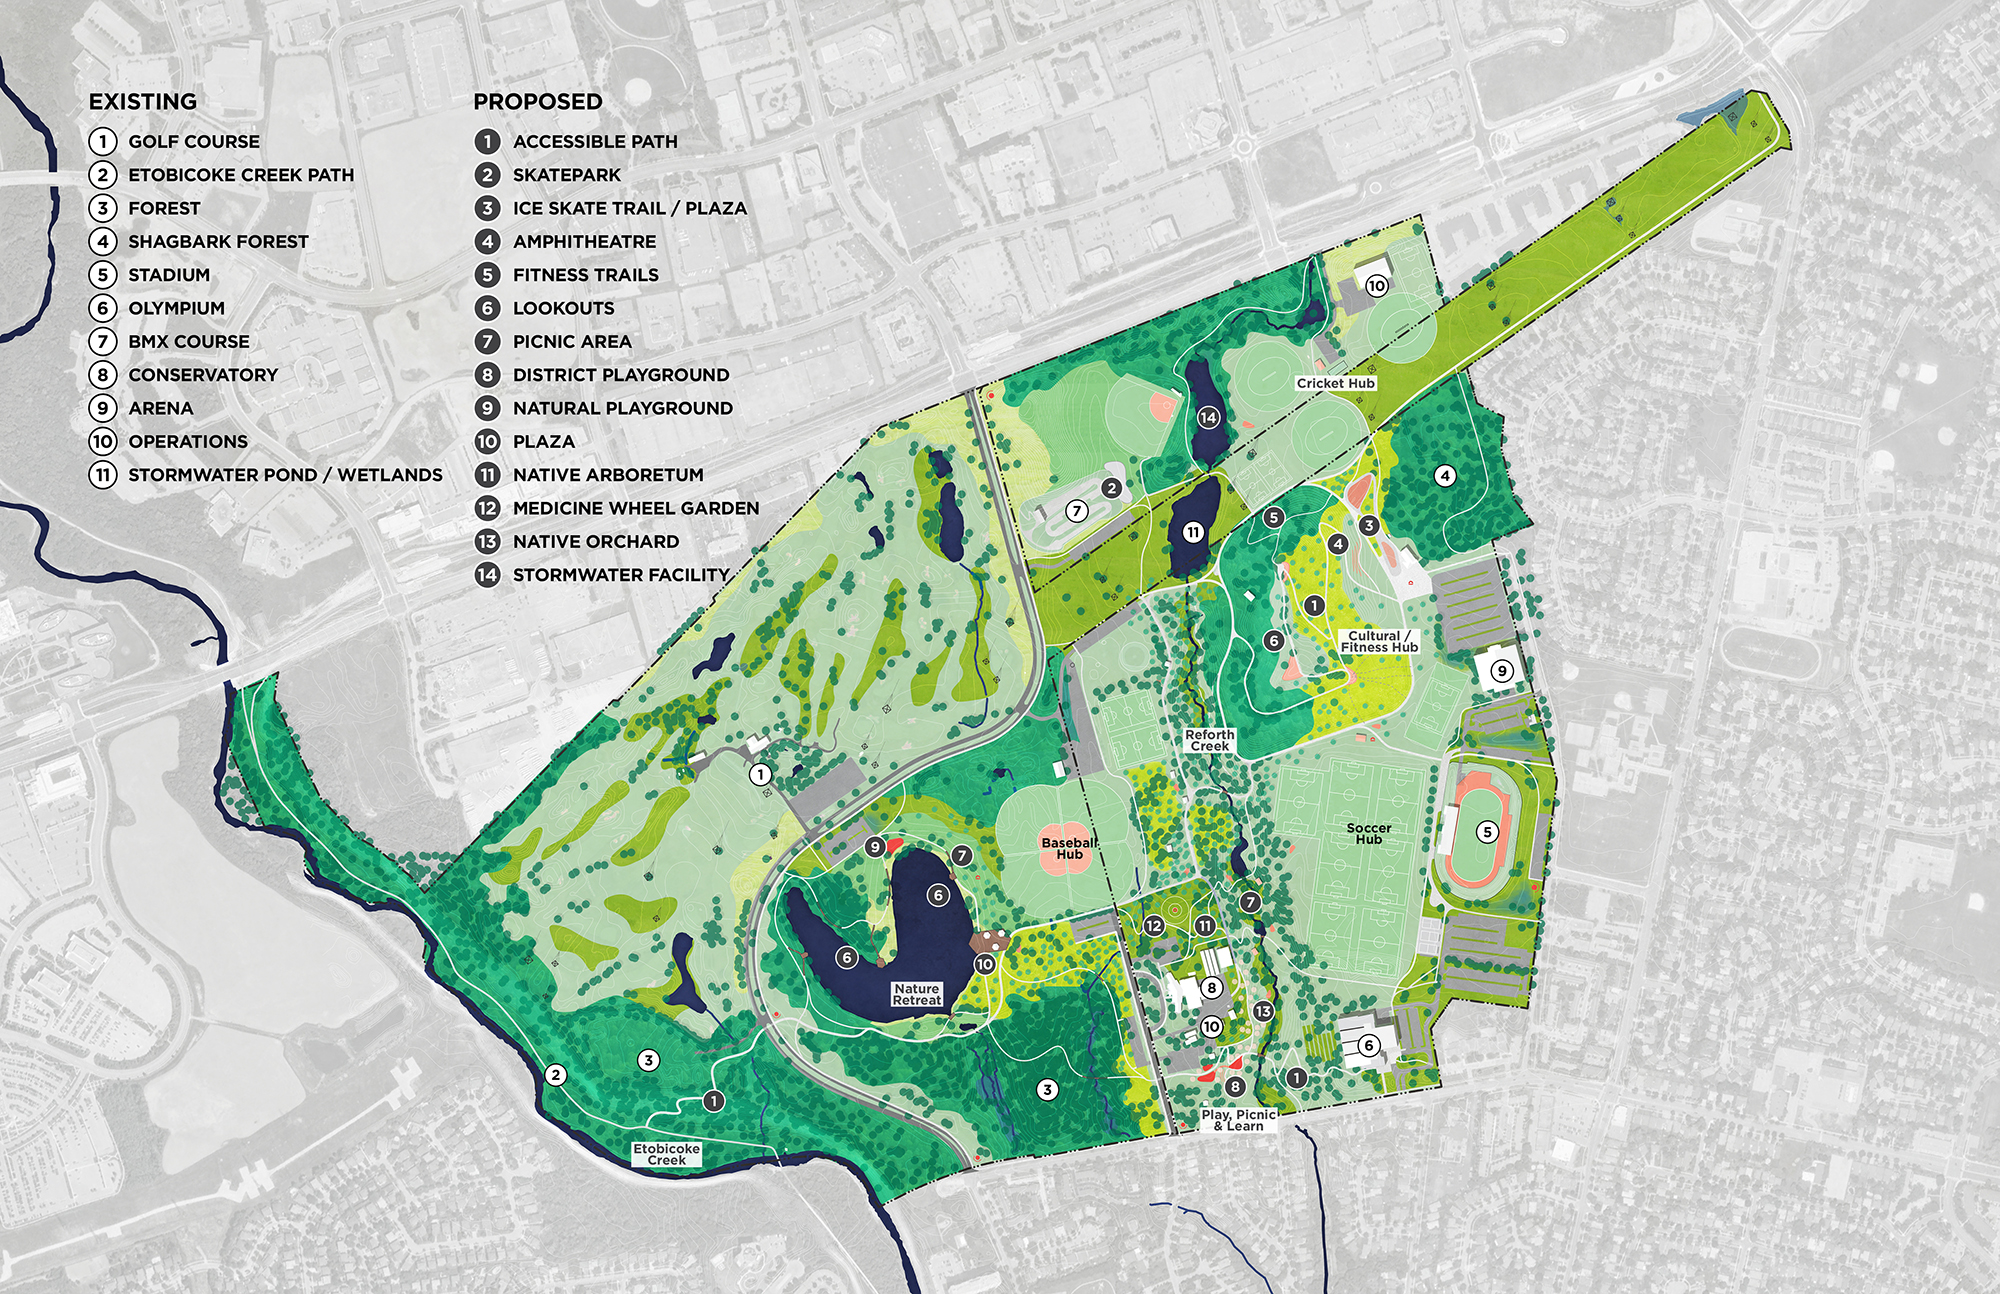 The masterplan image depicts a number of key existing features and improvements. Key existing features include Etobicoke Creek and path on the west side of the park; a manmade pond in the west area of the park; Renforth creek down the middle of the park, a hydro corridor running east-west across the park; an existing golf course; flying circle; BMX course; mini-indy; ski hill; baseball, soccer and cricket fields; stadium, arena, olympium, and conservatory buildings; and two existing forested areas. New features include an accessible path to Etobicoke Creek; nature lookouts on the pond; play and picnic areas; seperate baseball, soccer, and cricket hubs; an amphitheatre, art lookouts,fitness trails and accesible path on the re-purposed ski hill; a plaza and skate trail at the base of the hill; and naturalization of a portion of Renforth Creek.